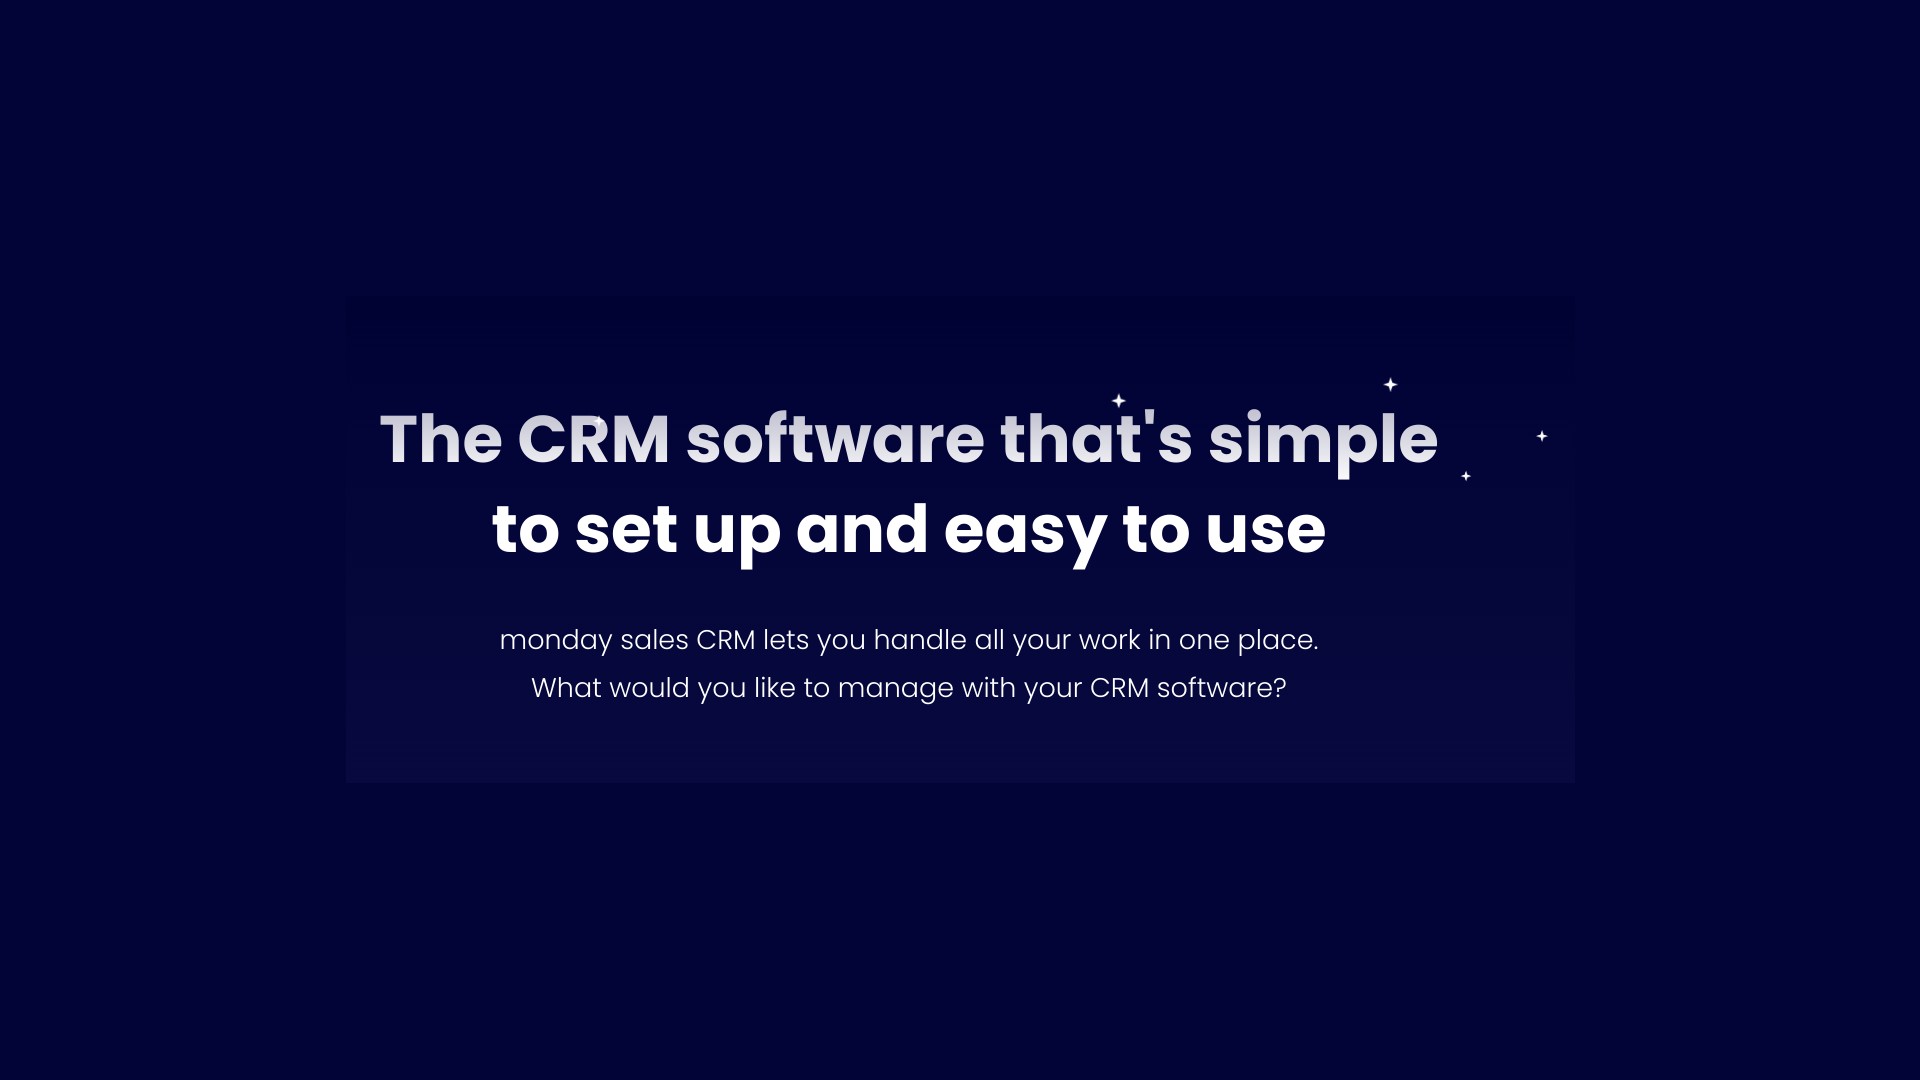 How to Choose the Best CRM for Your Business